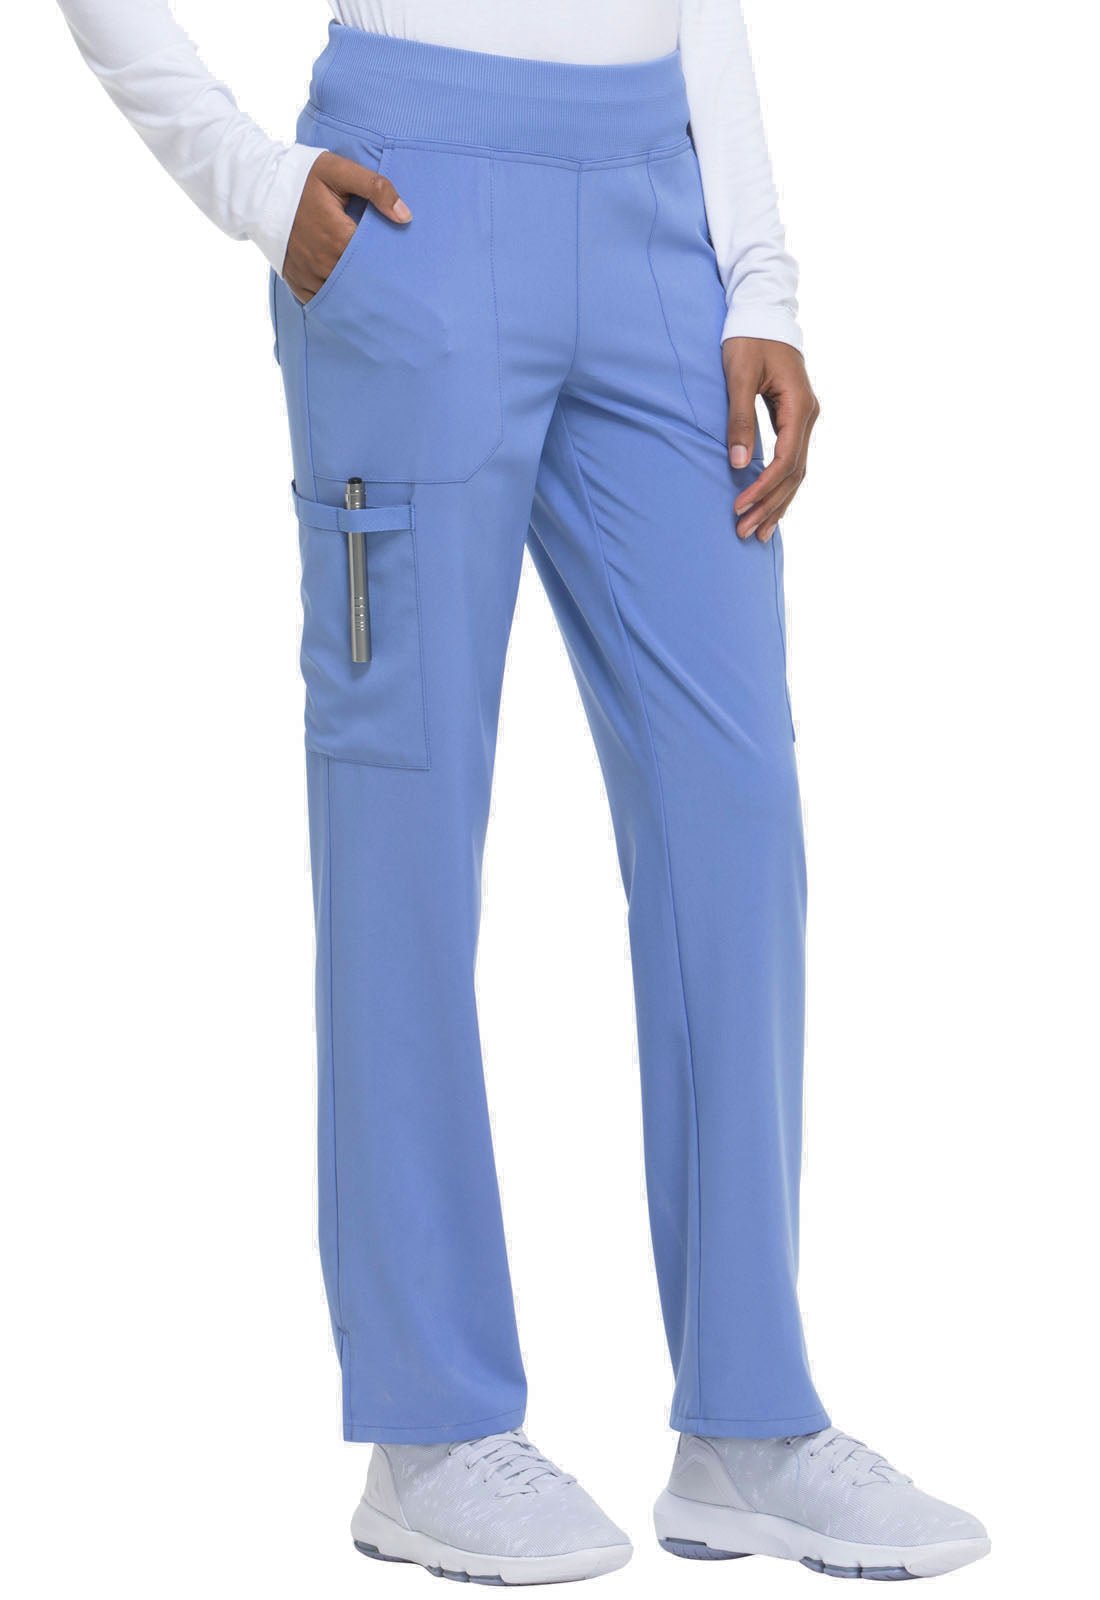 Dickies EDS Essentials Tapered Leg Pant DK005 in Ciel, Royal, White - Scrubs Select